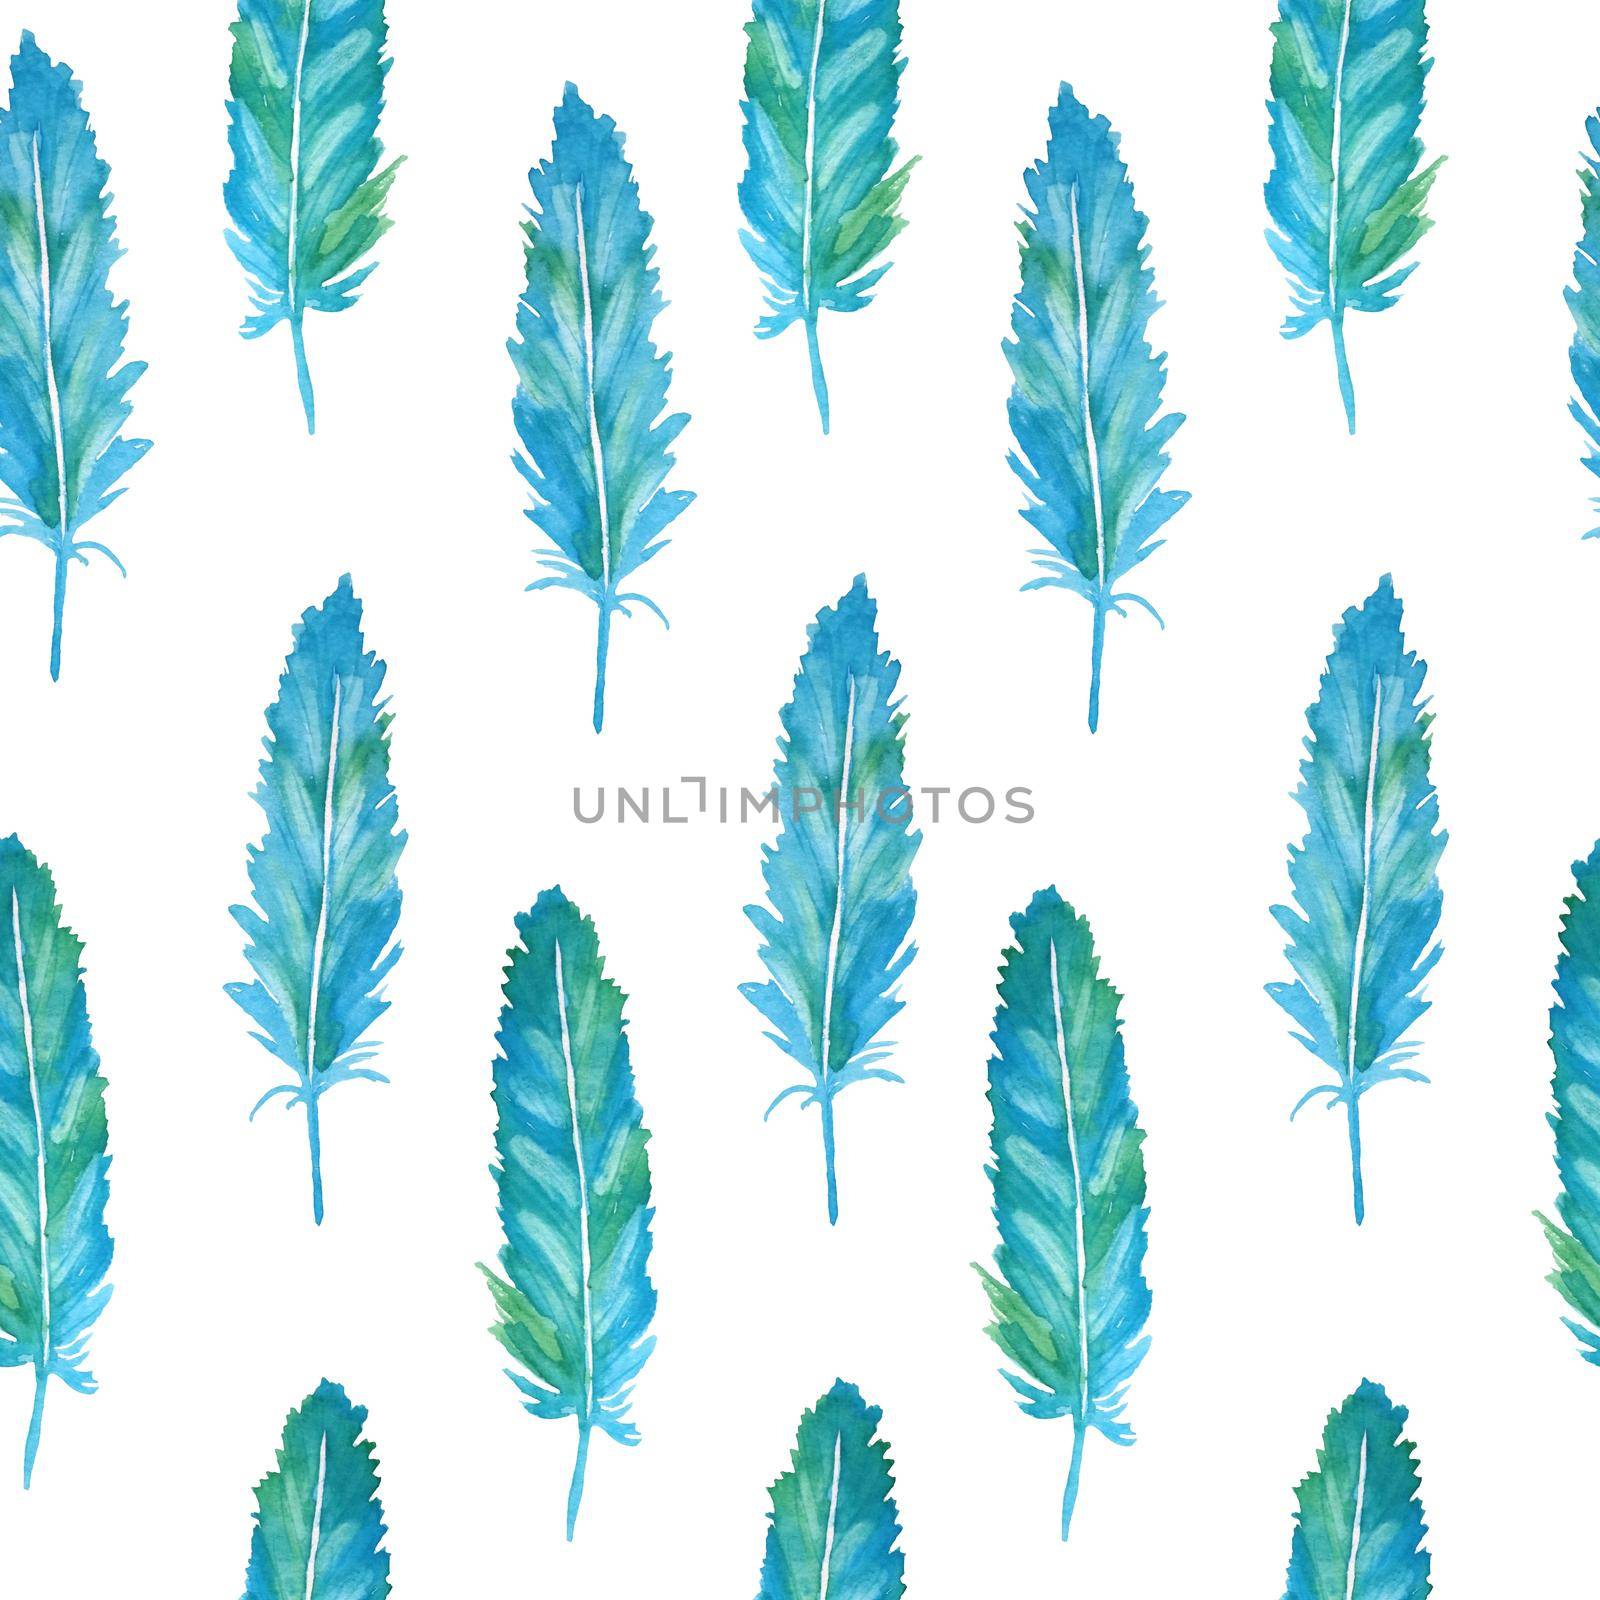 Watercolor seamless hand drawn pattern with blue green turquoise feathers. Aquamarine boho background for textile wallpapers. Romantic sketch retro wedding illustration